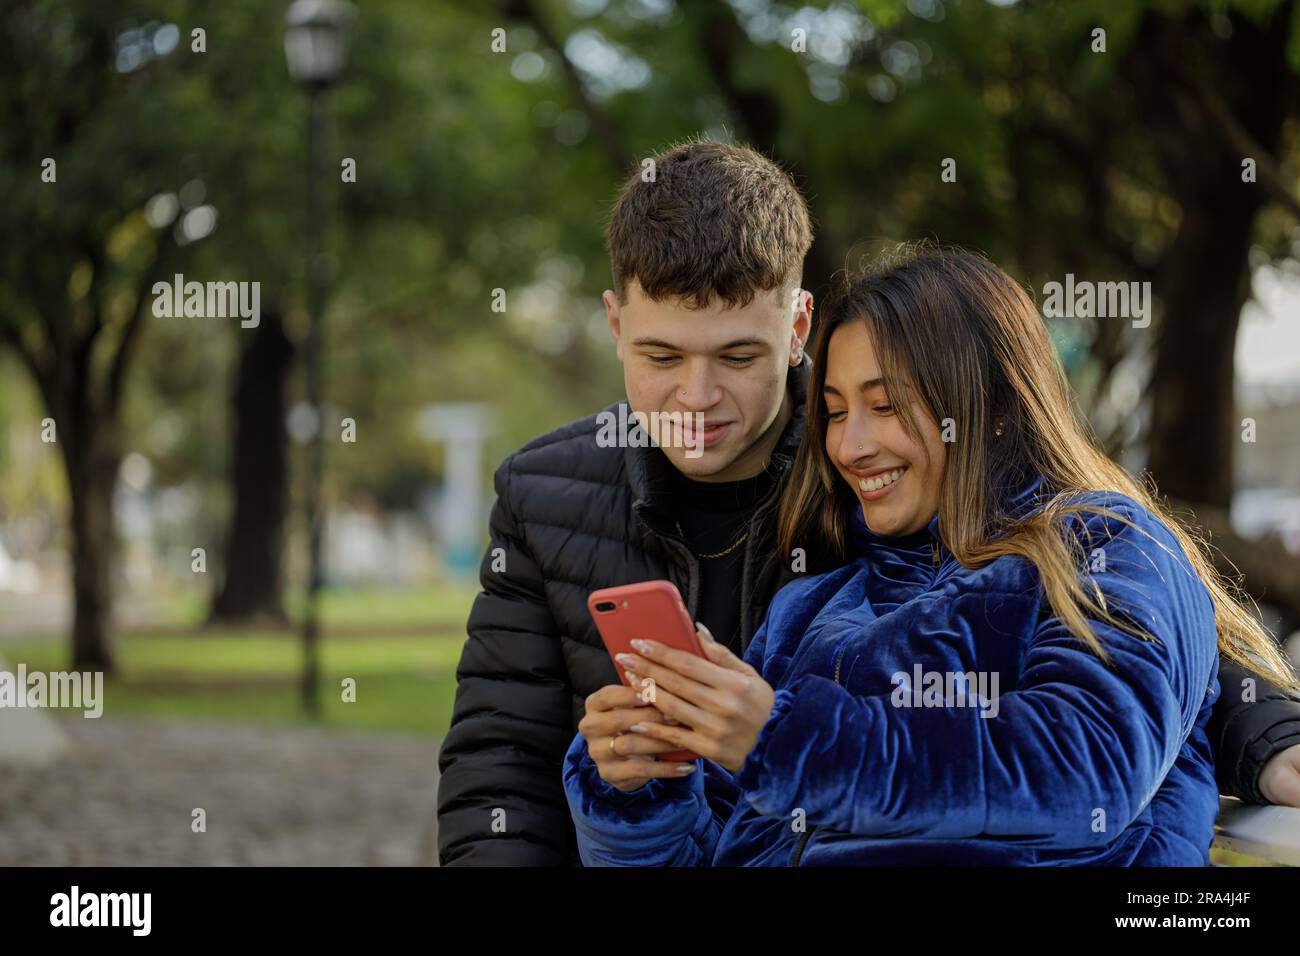 Latina girl and Caucasian boy sitting on a bench in a public park. Stock Photo